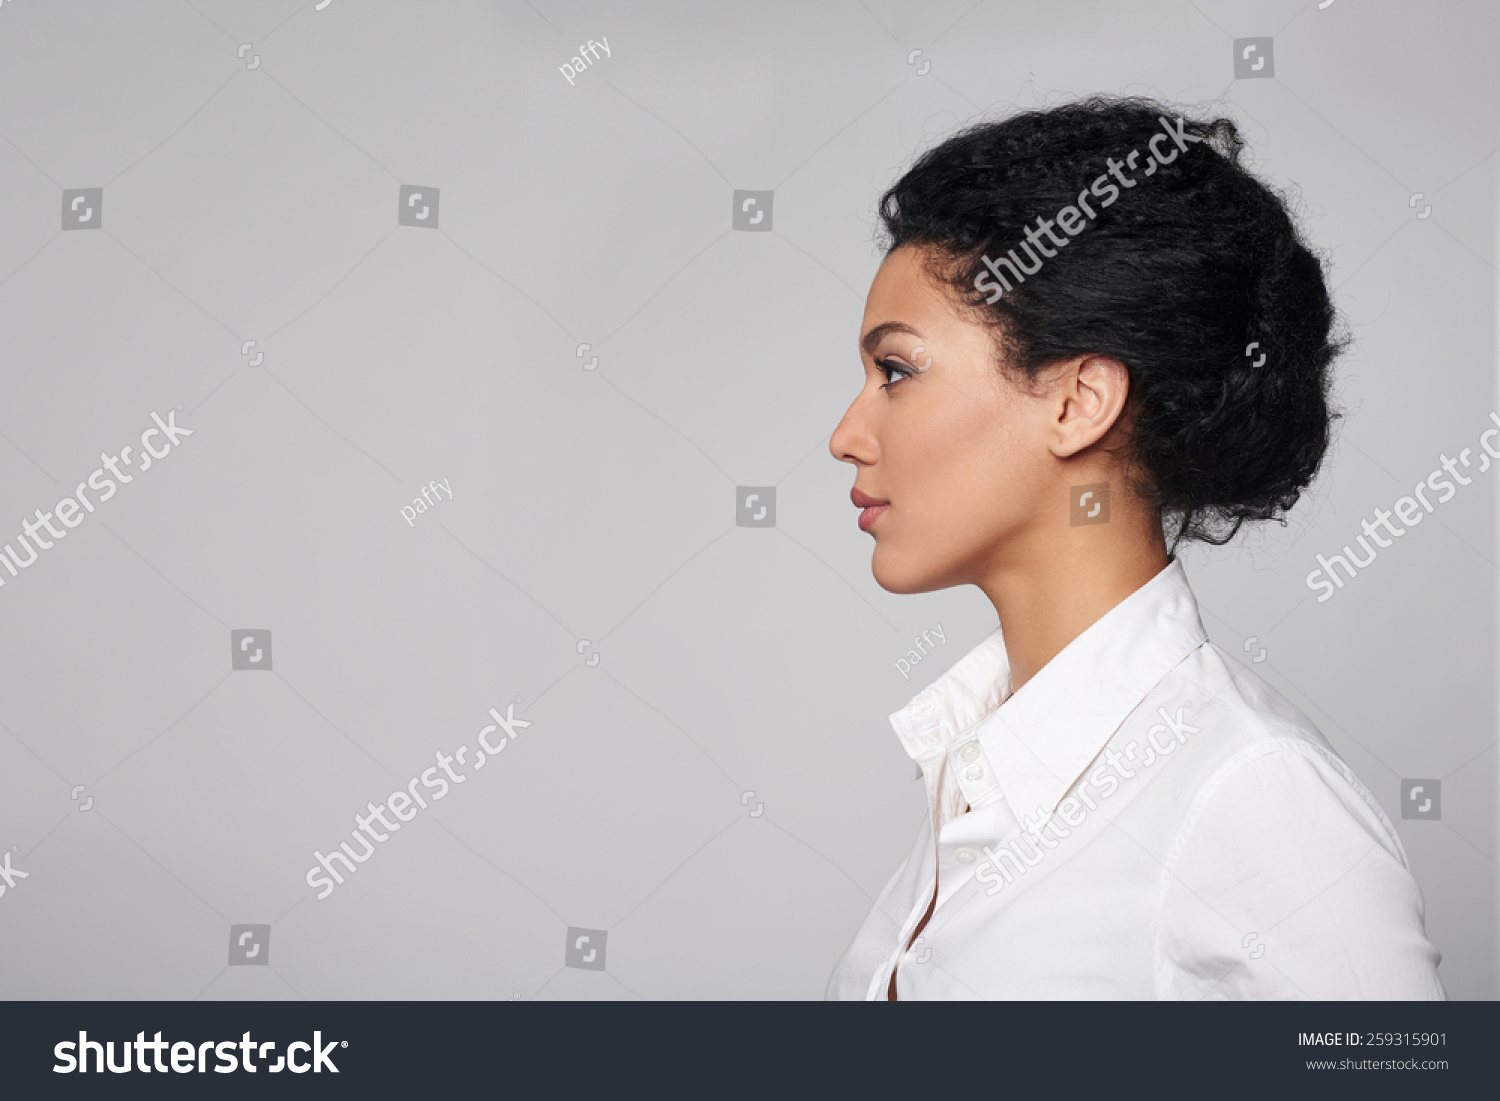 Closeup profile of confident business woman looking forward isolated on gray background #259315901